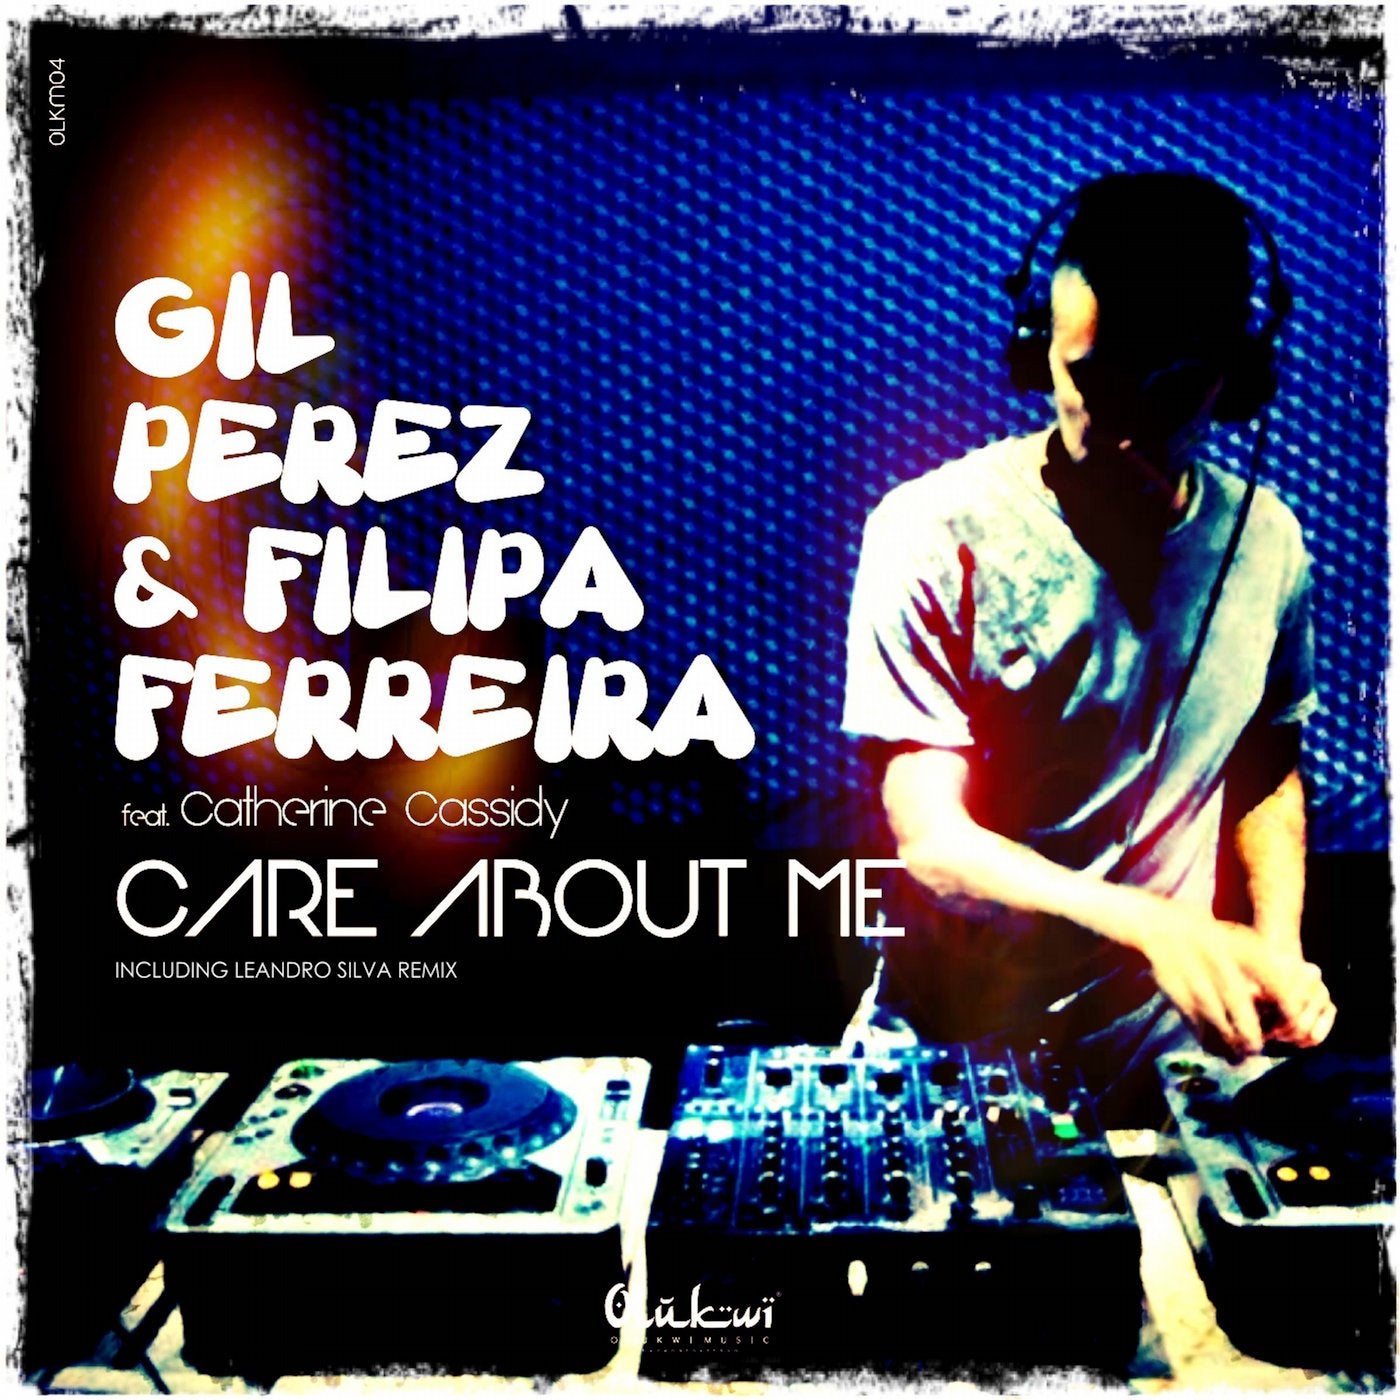 Care About Me (incl. Leandro Silva Remix)